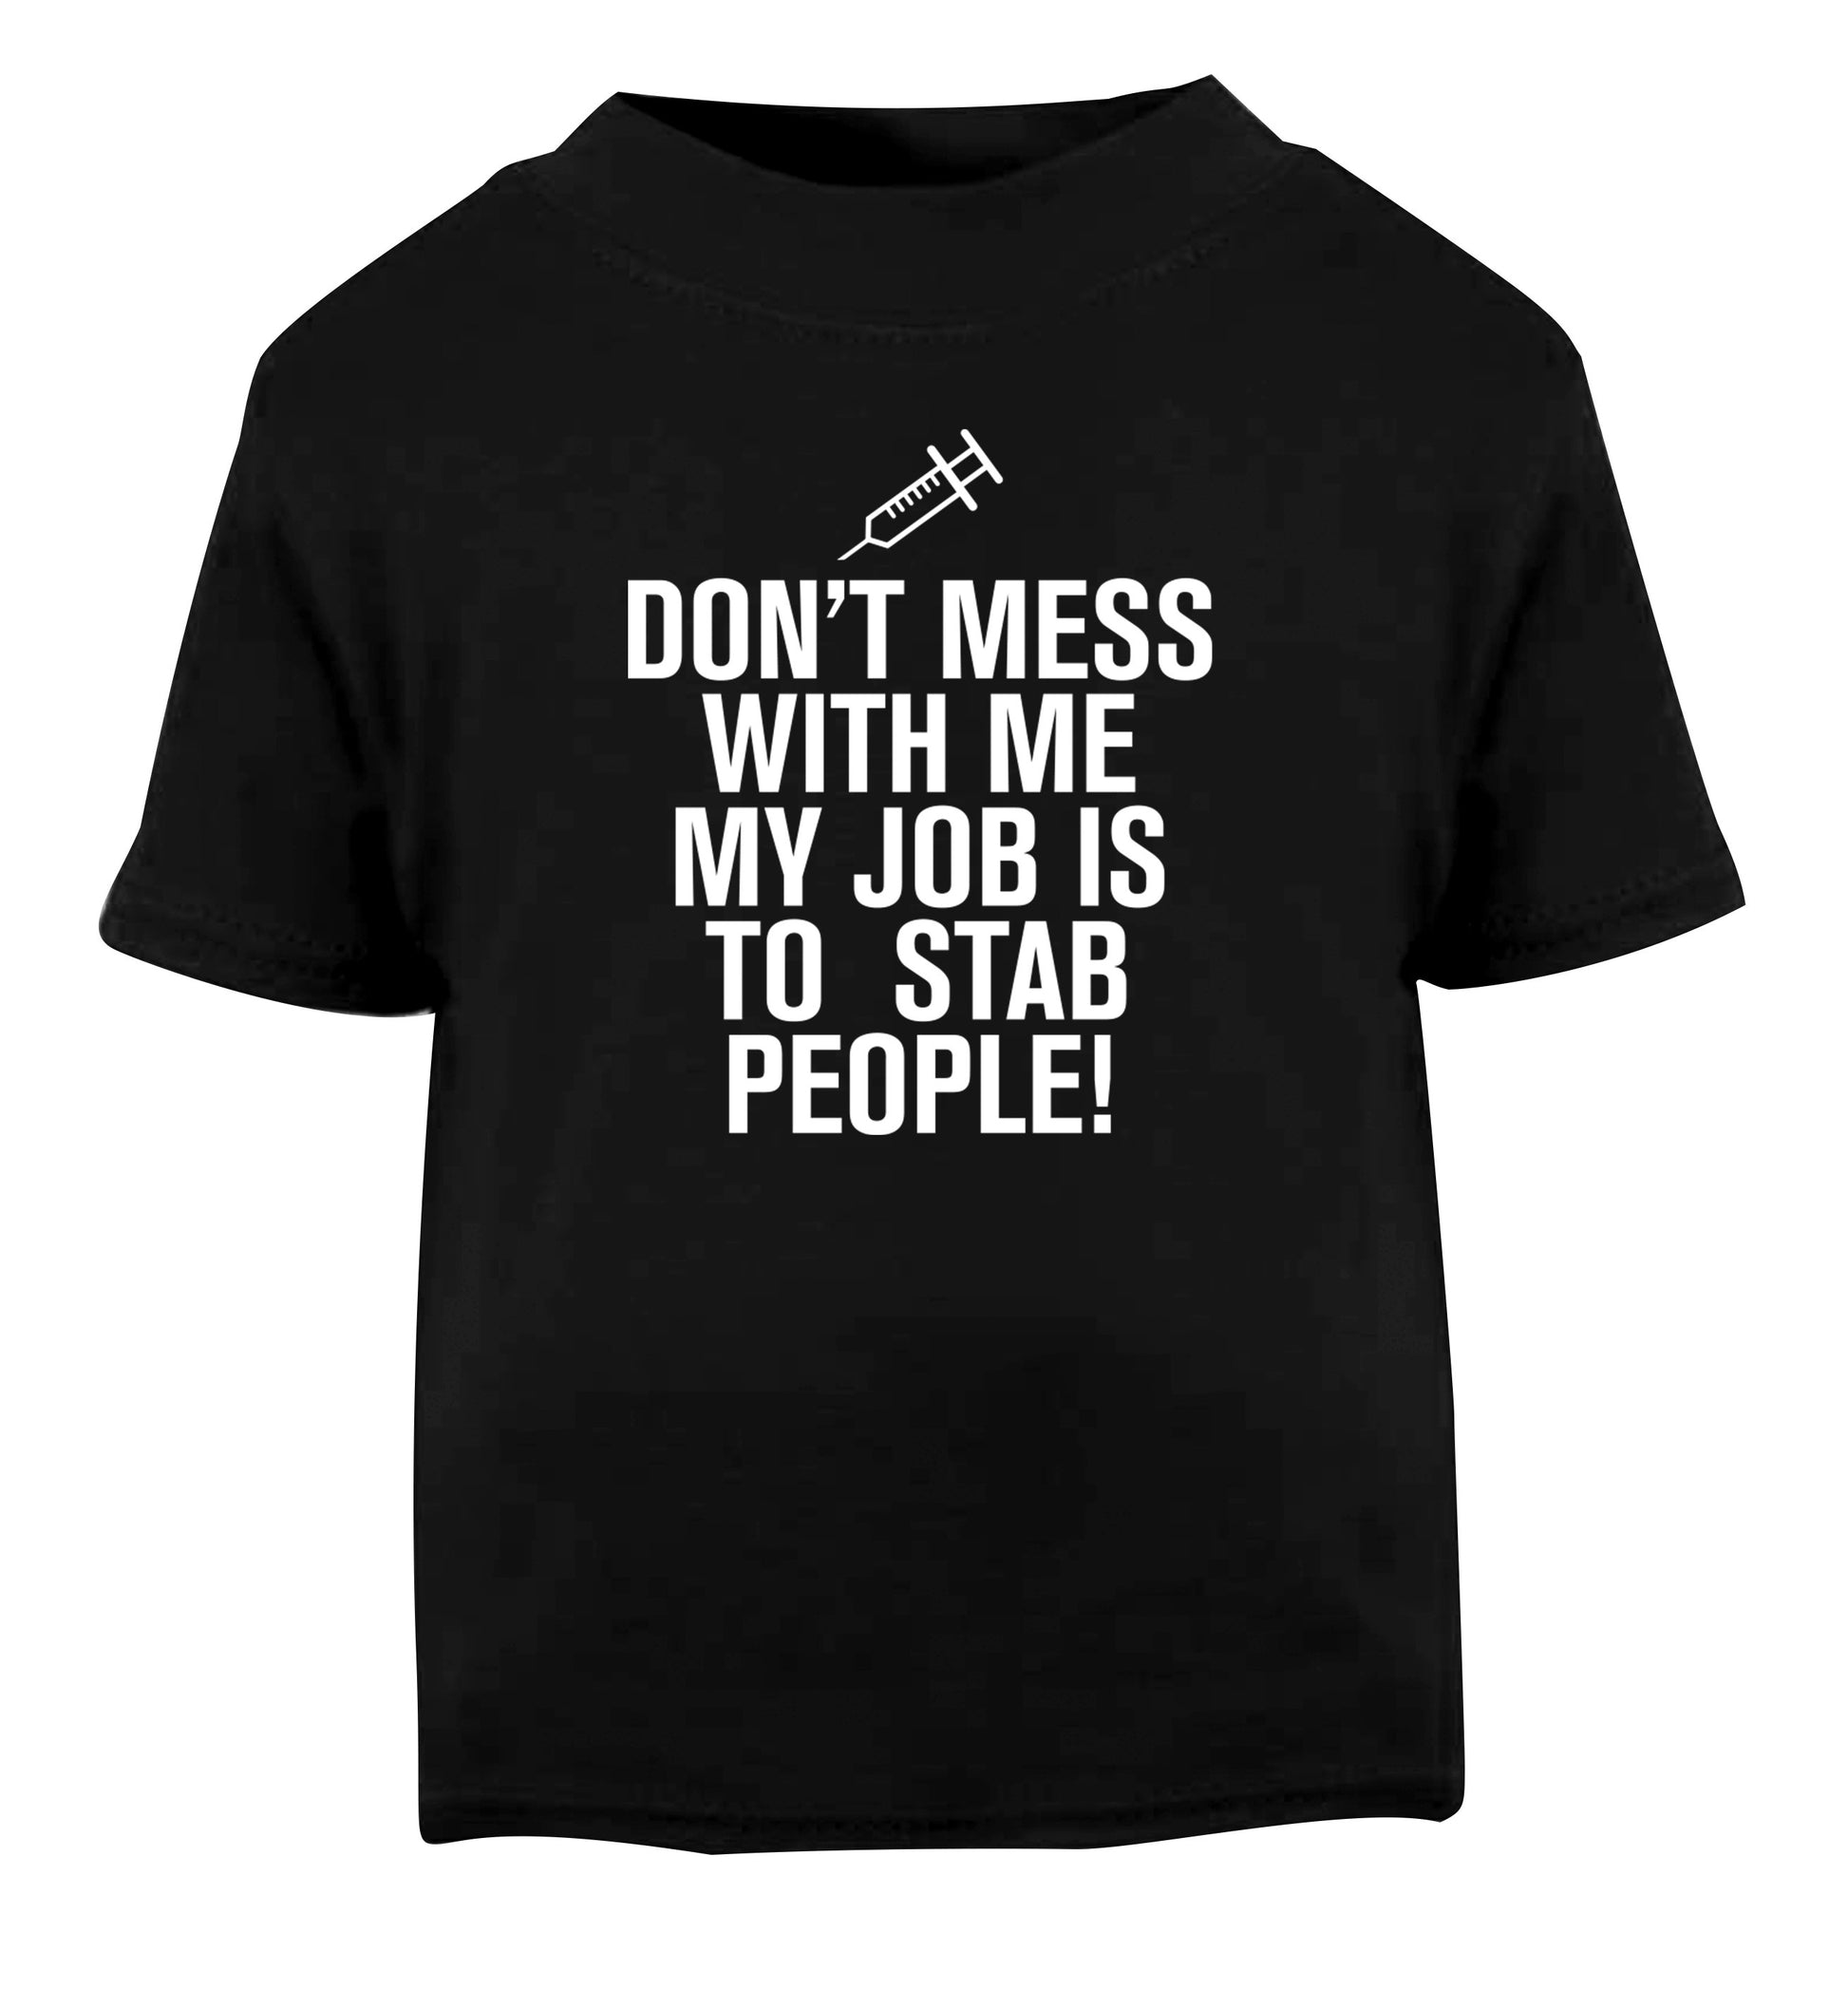 Don't mess with me my job is to stab people! Black Baby Toddler Tshirt 2 years